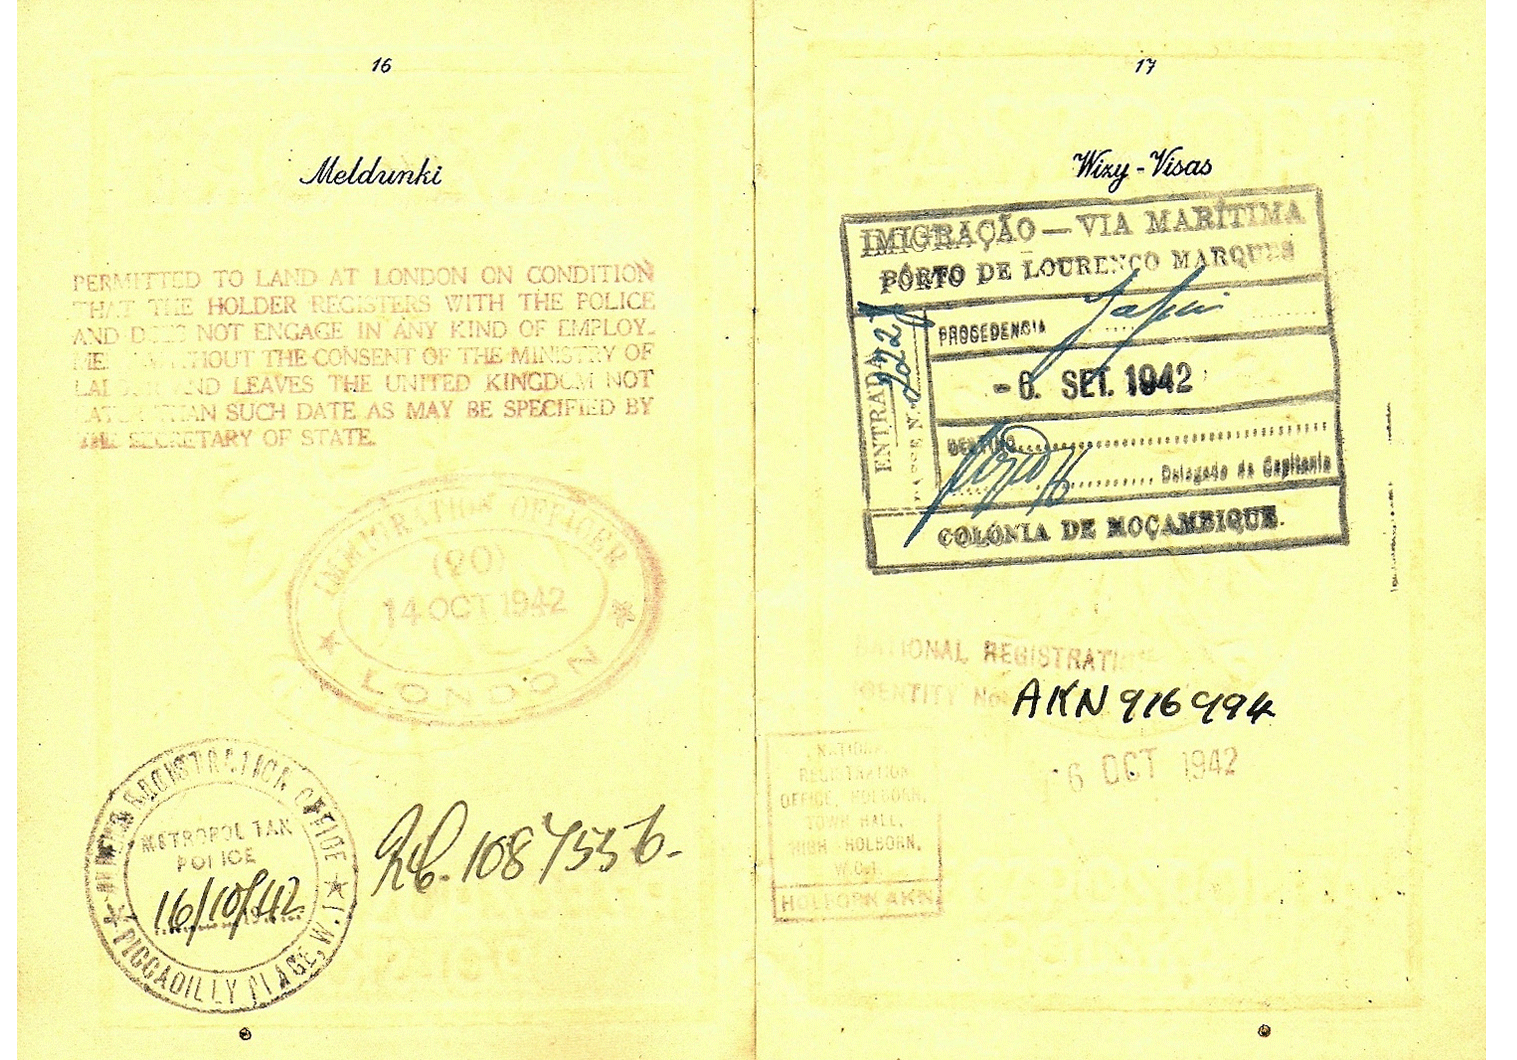 Mozambique exchange of Allied and Enemy personnel passport image